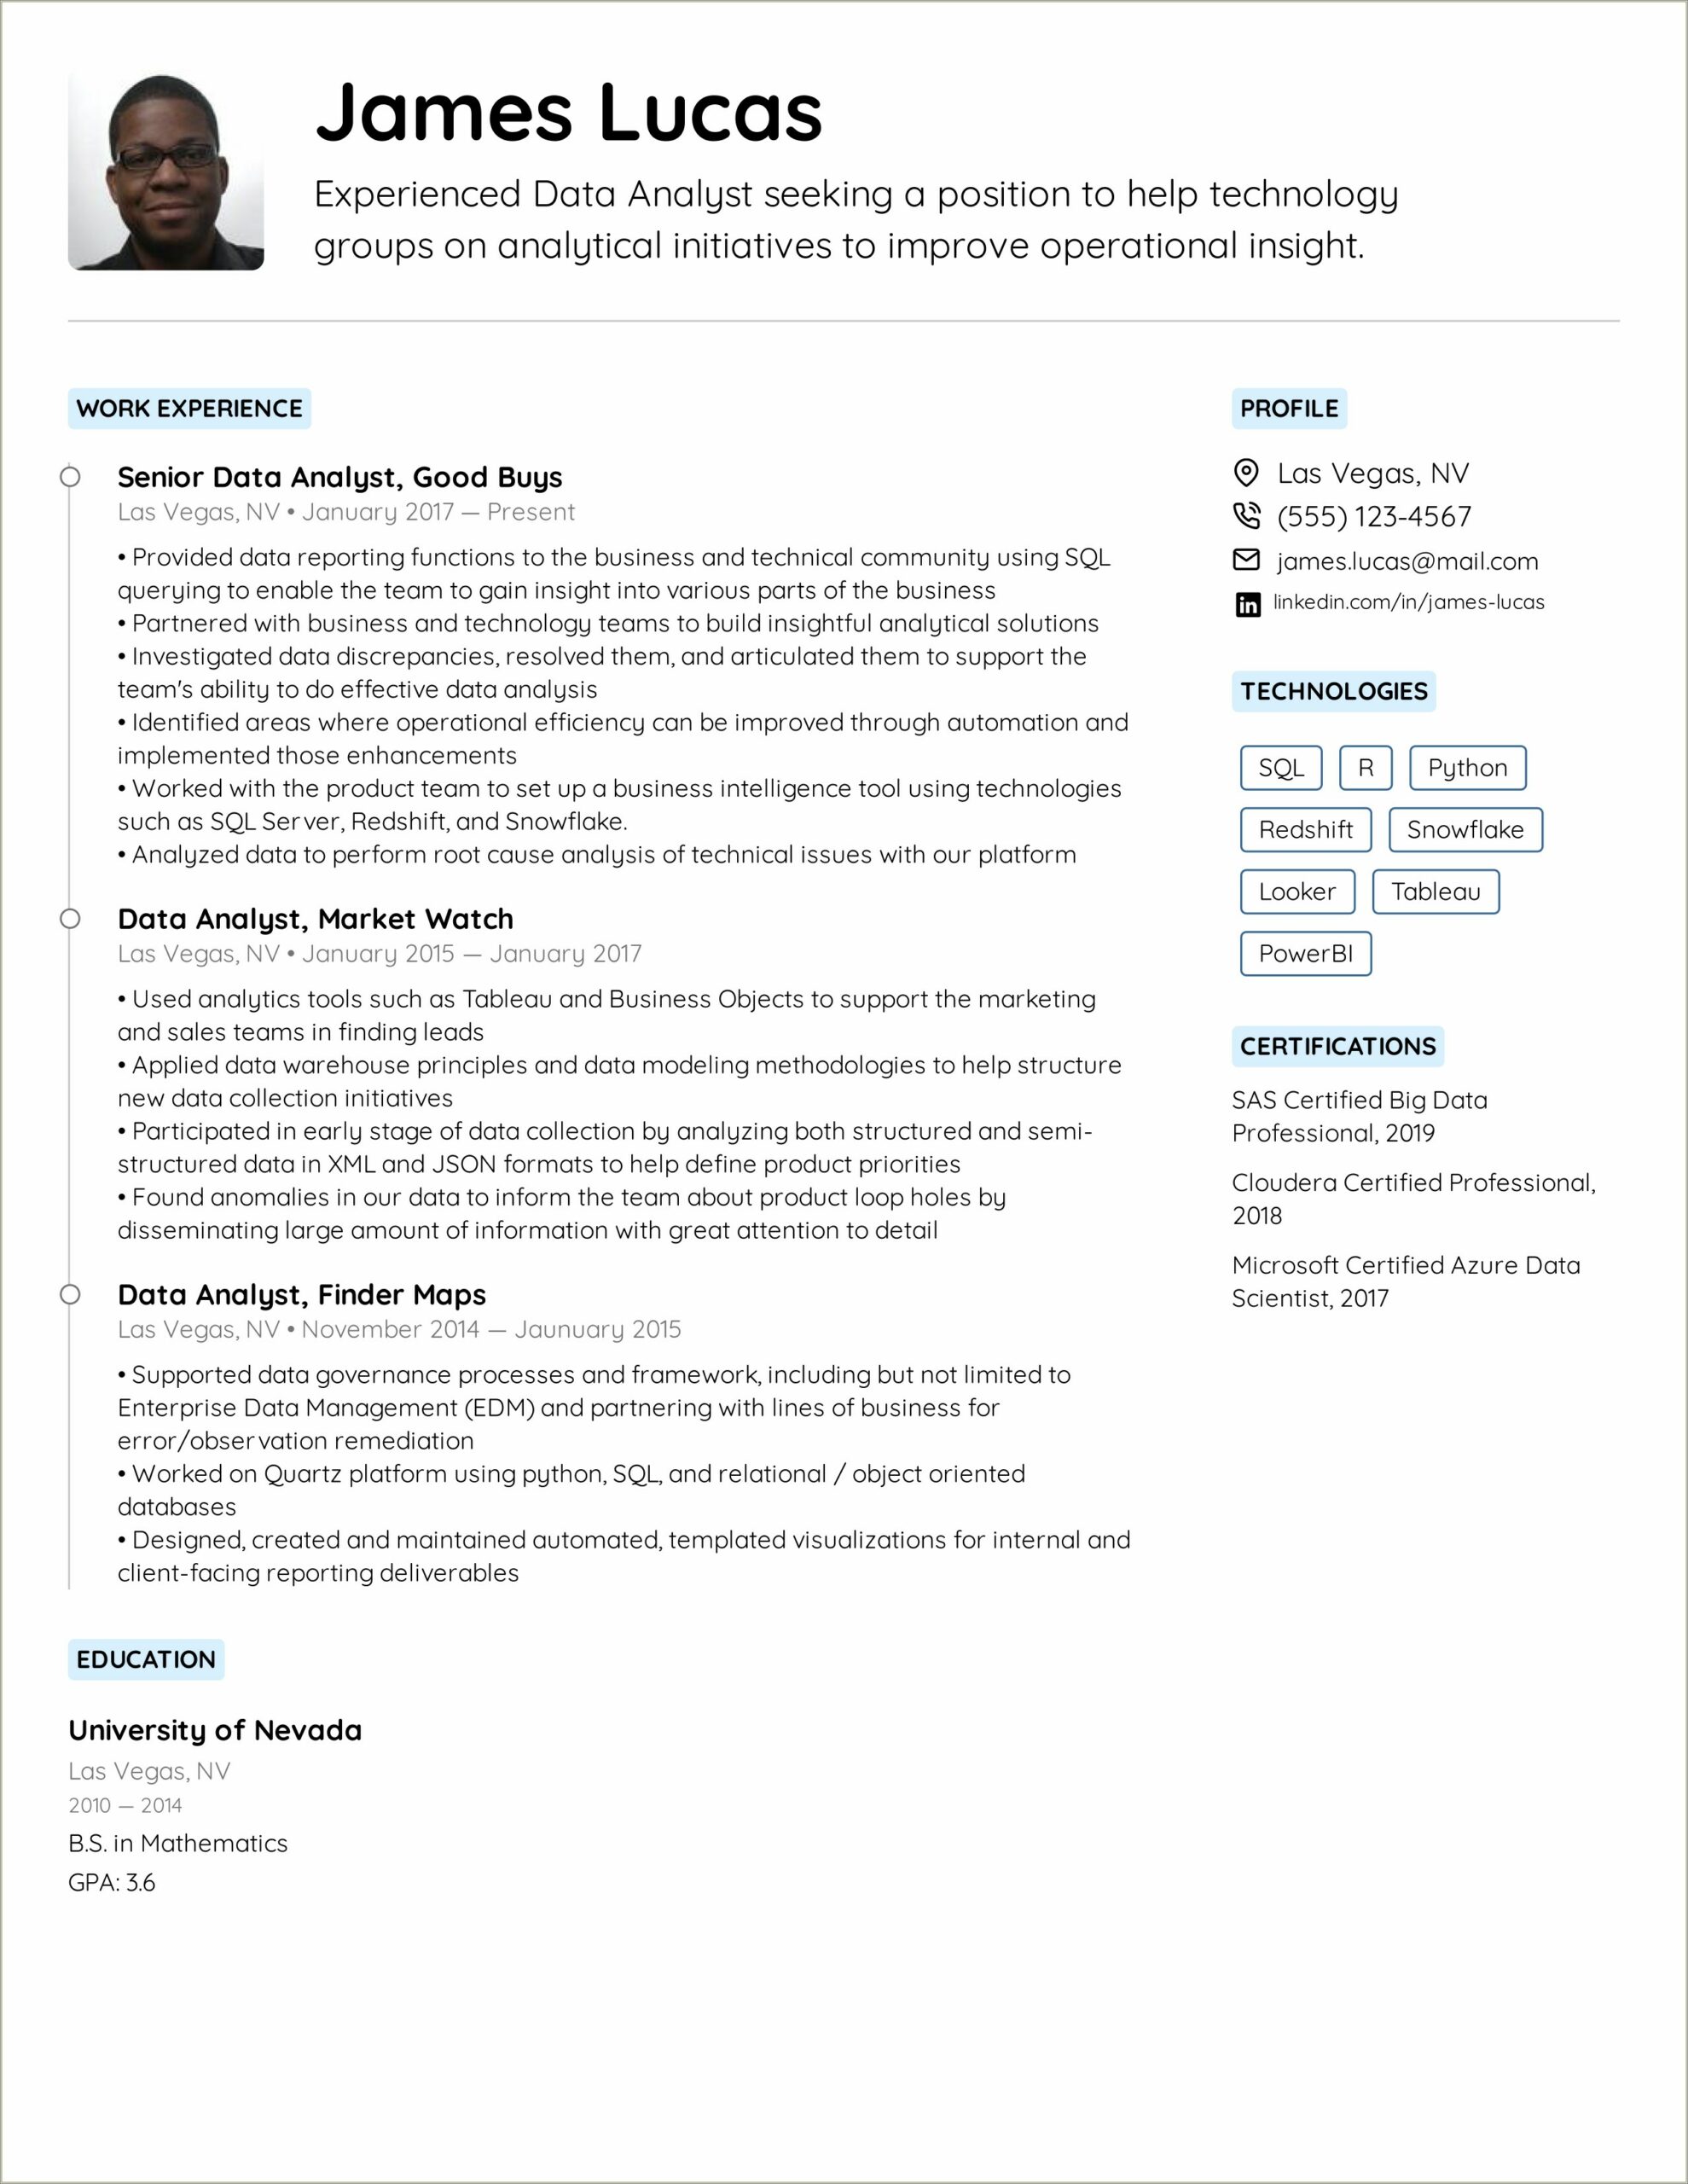 Resume Resume Work History And Education Required